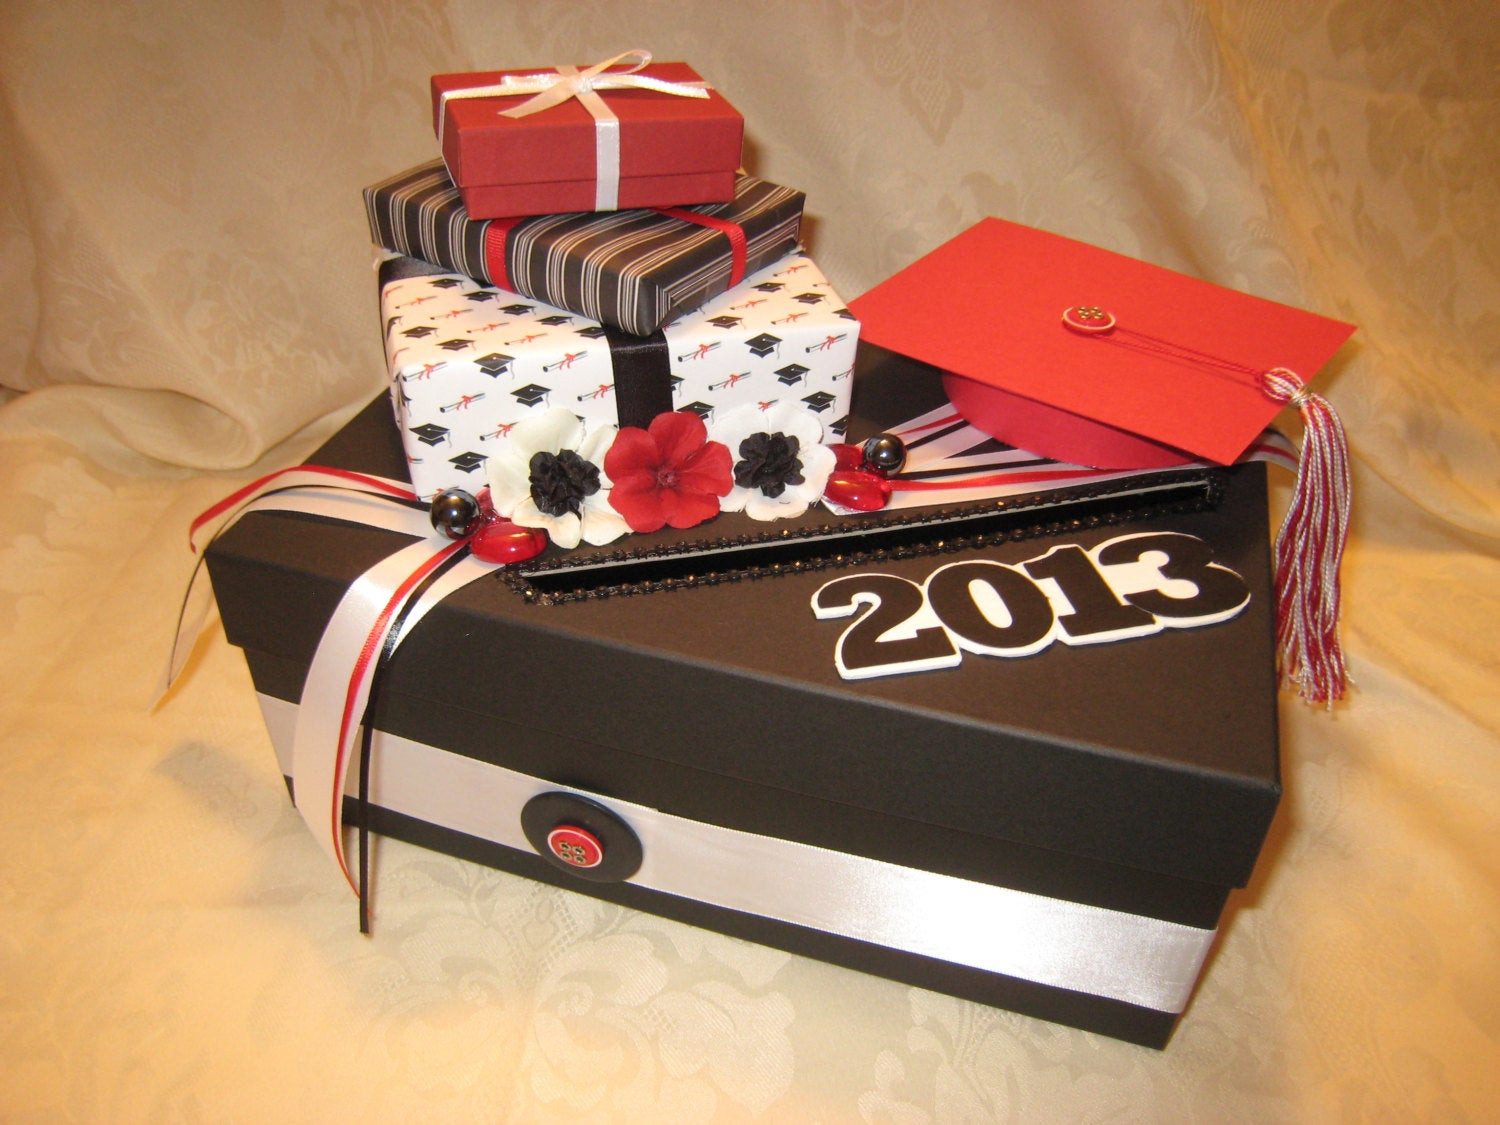 Card Box Ideas For Graduation Party
 Black Red White Graduation Party Card Box